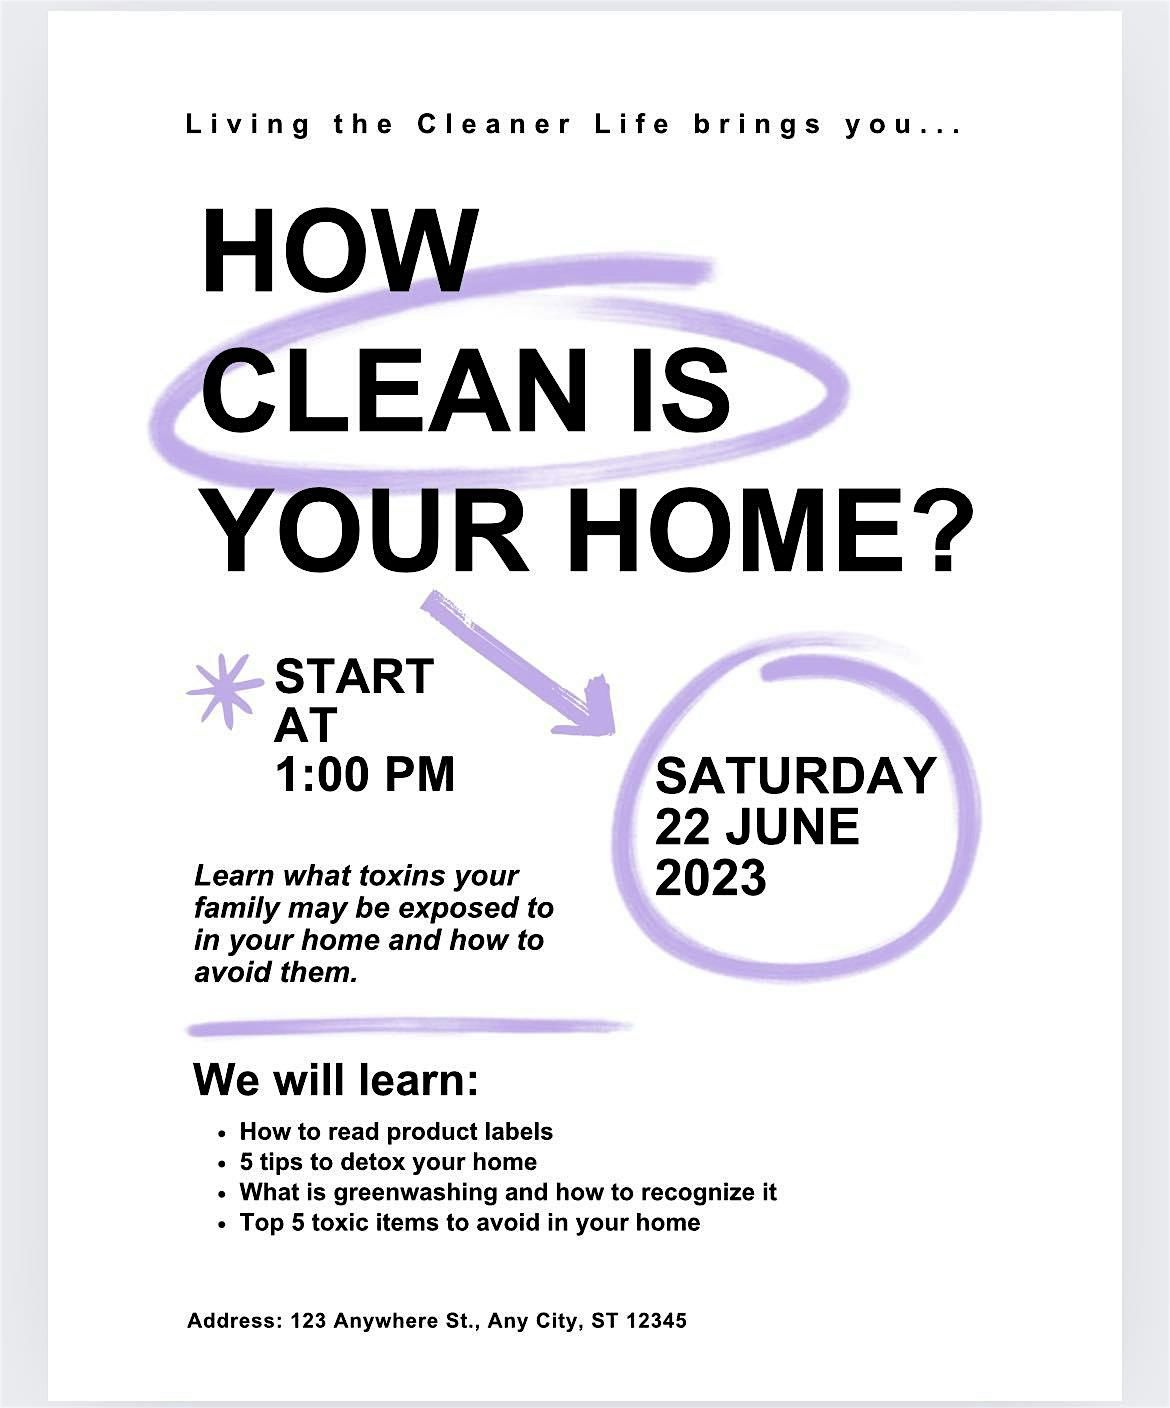 How Clean is Your Home?